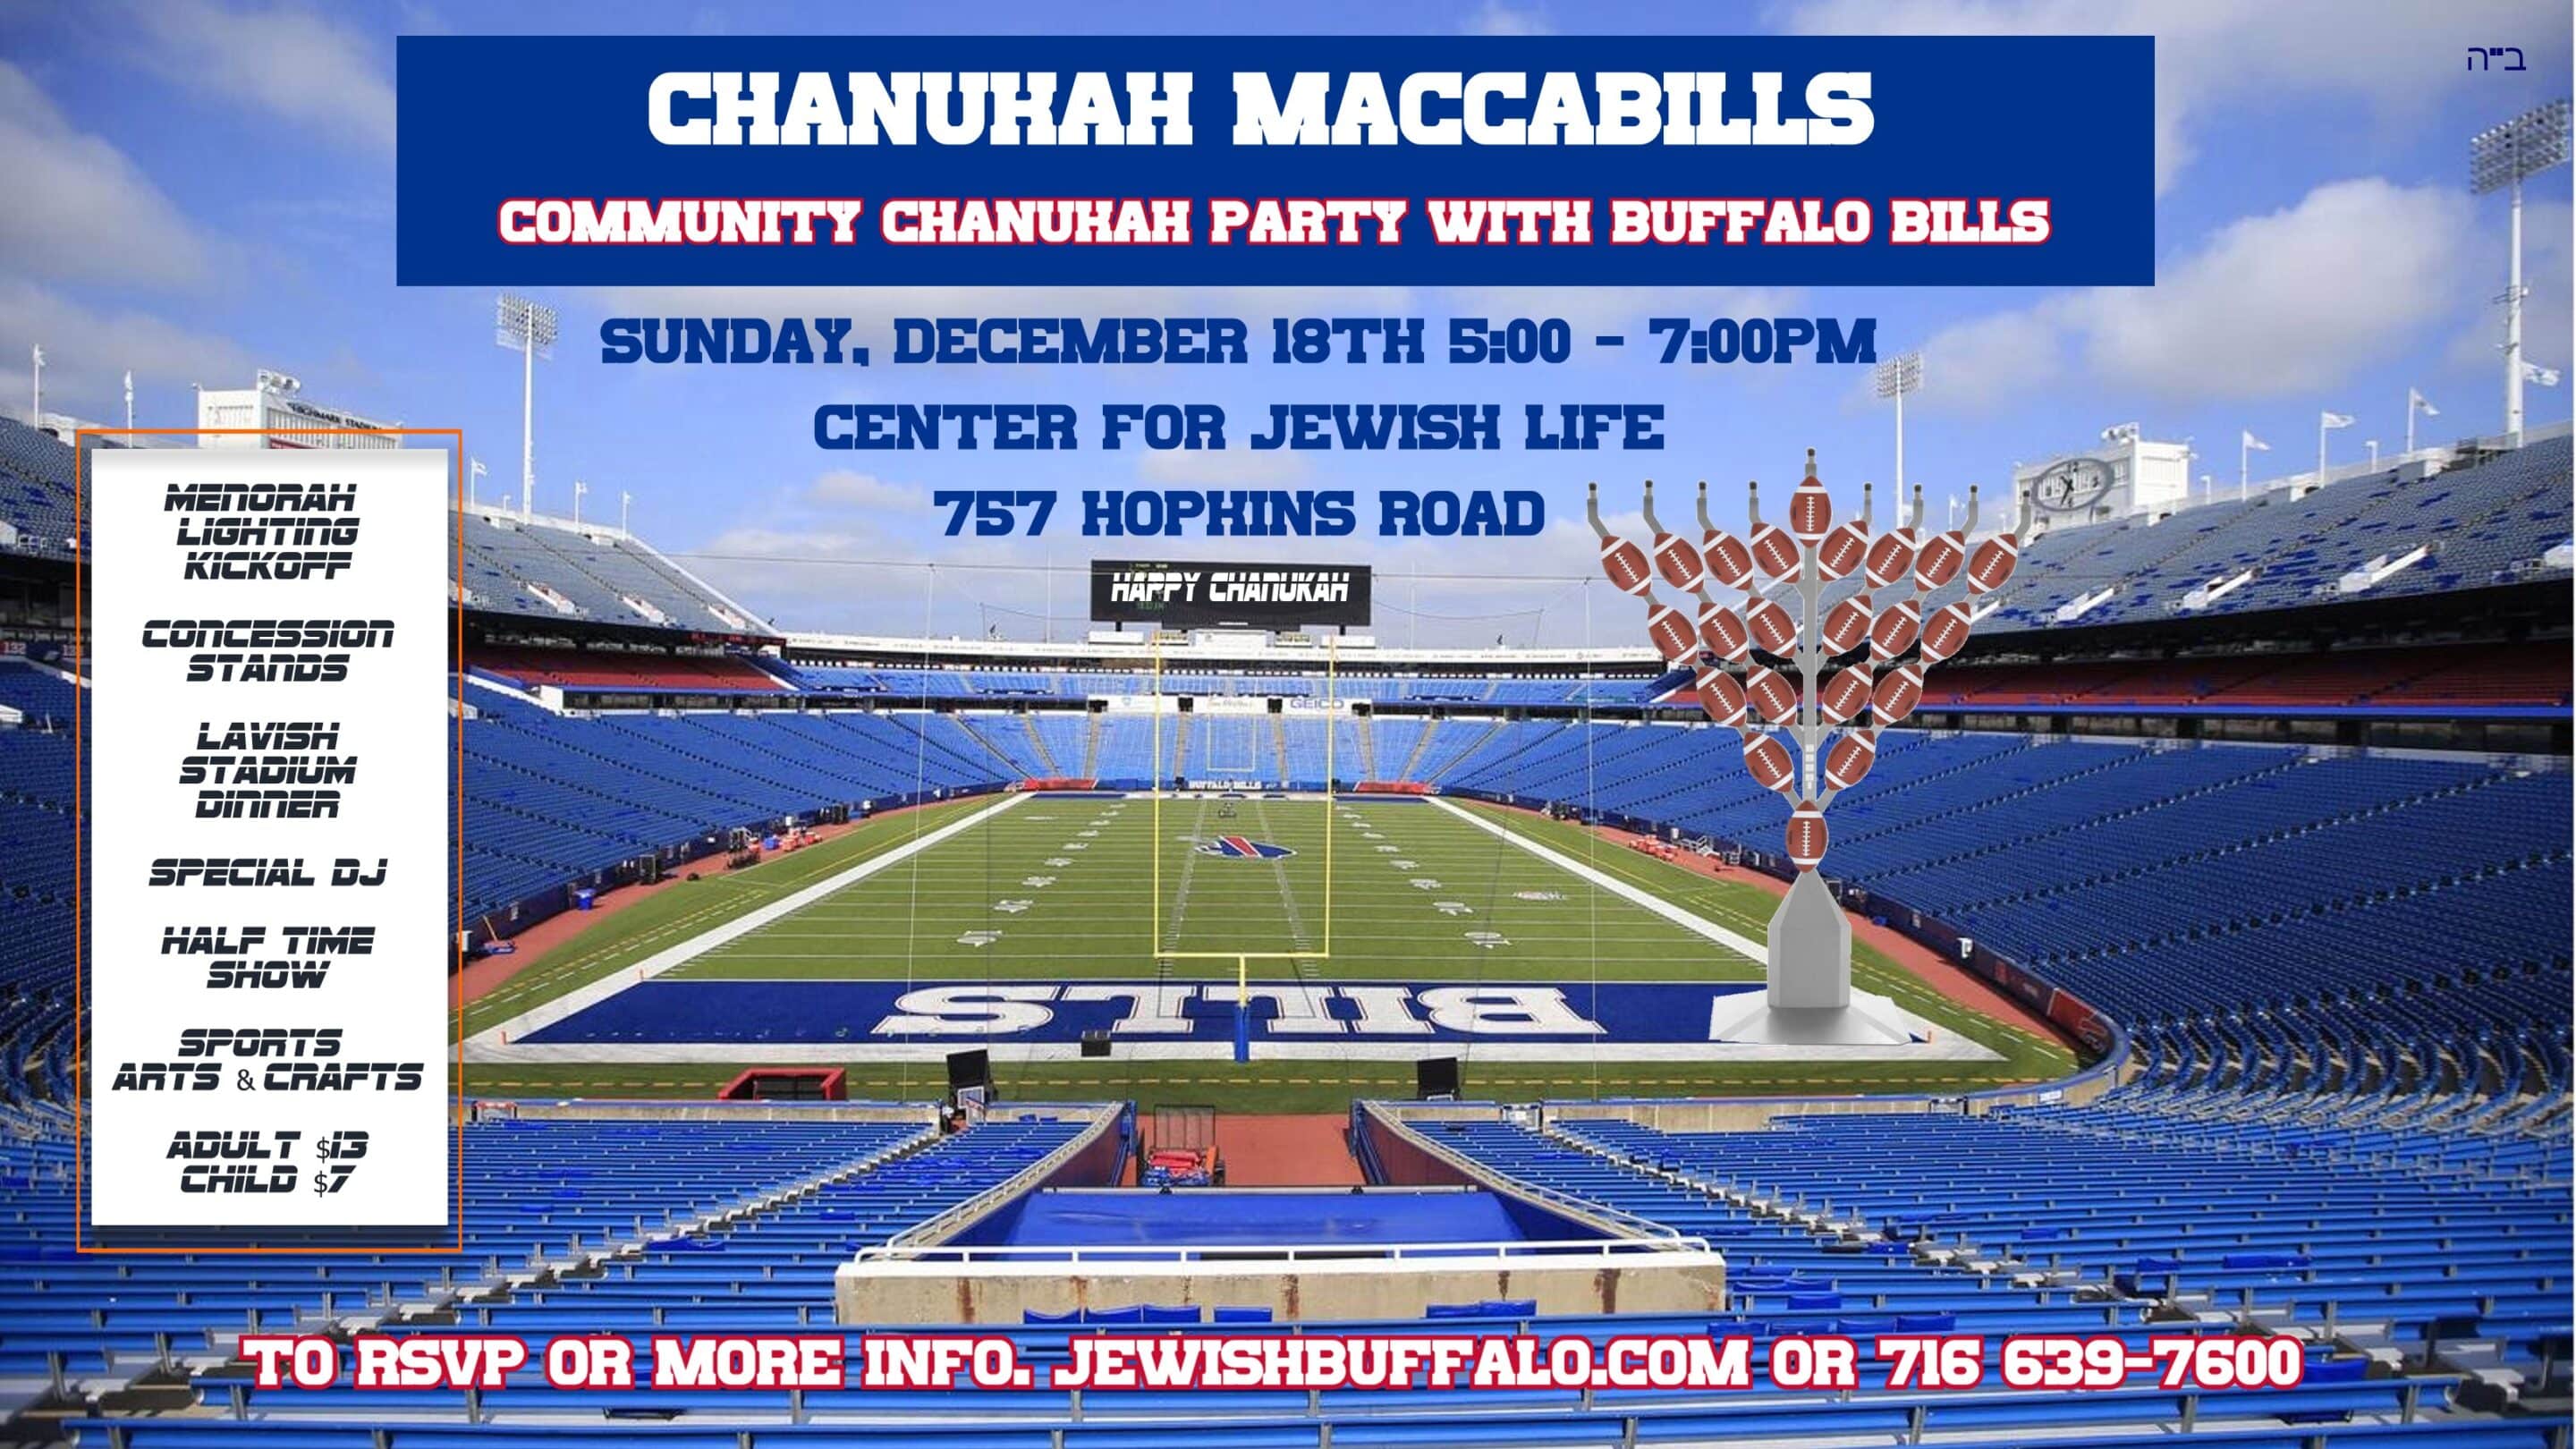 Chanukah Maccabills - Community Chanukah party with Buffalo Bills - party scaled